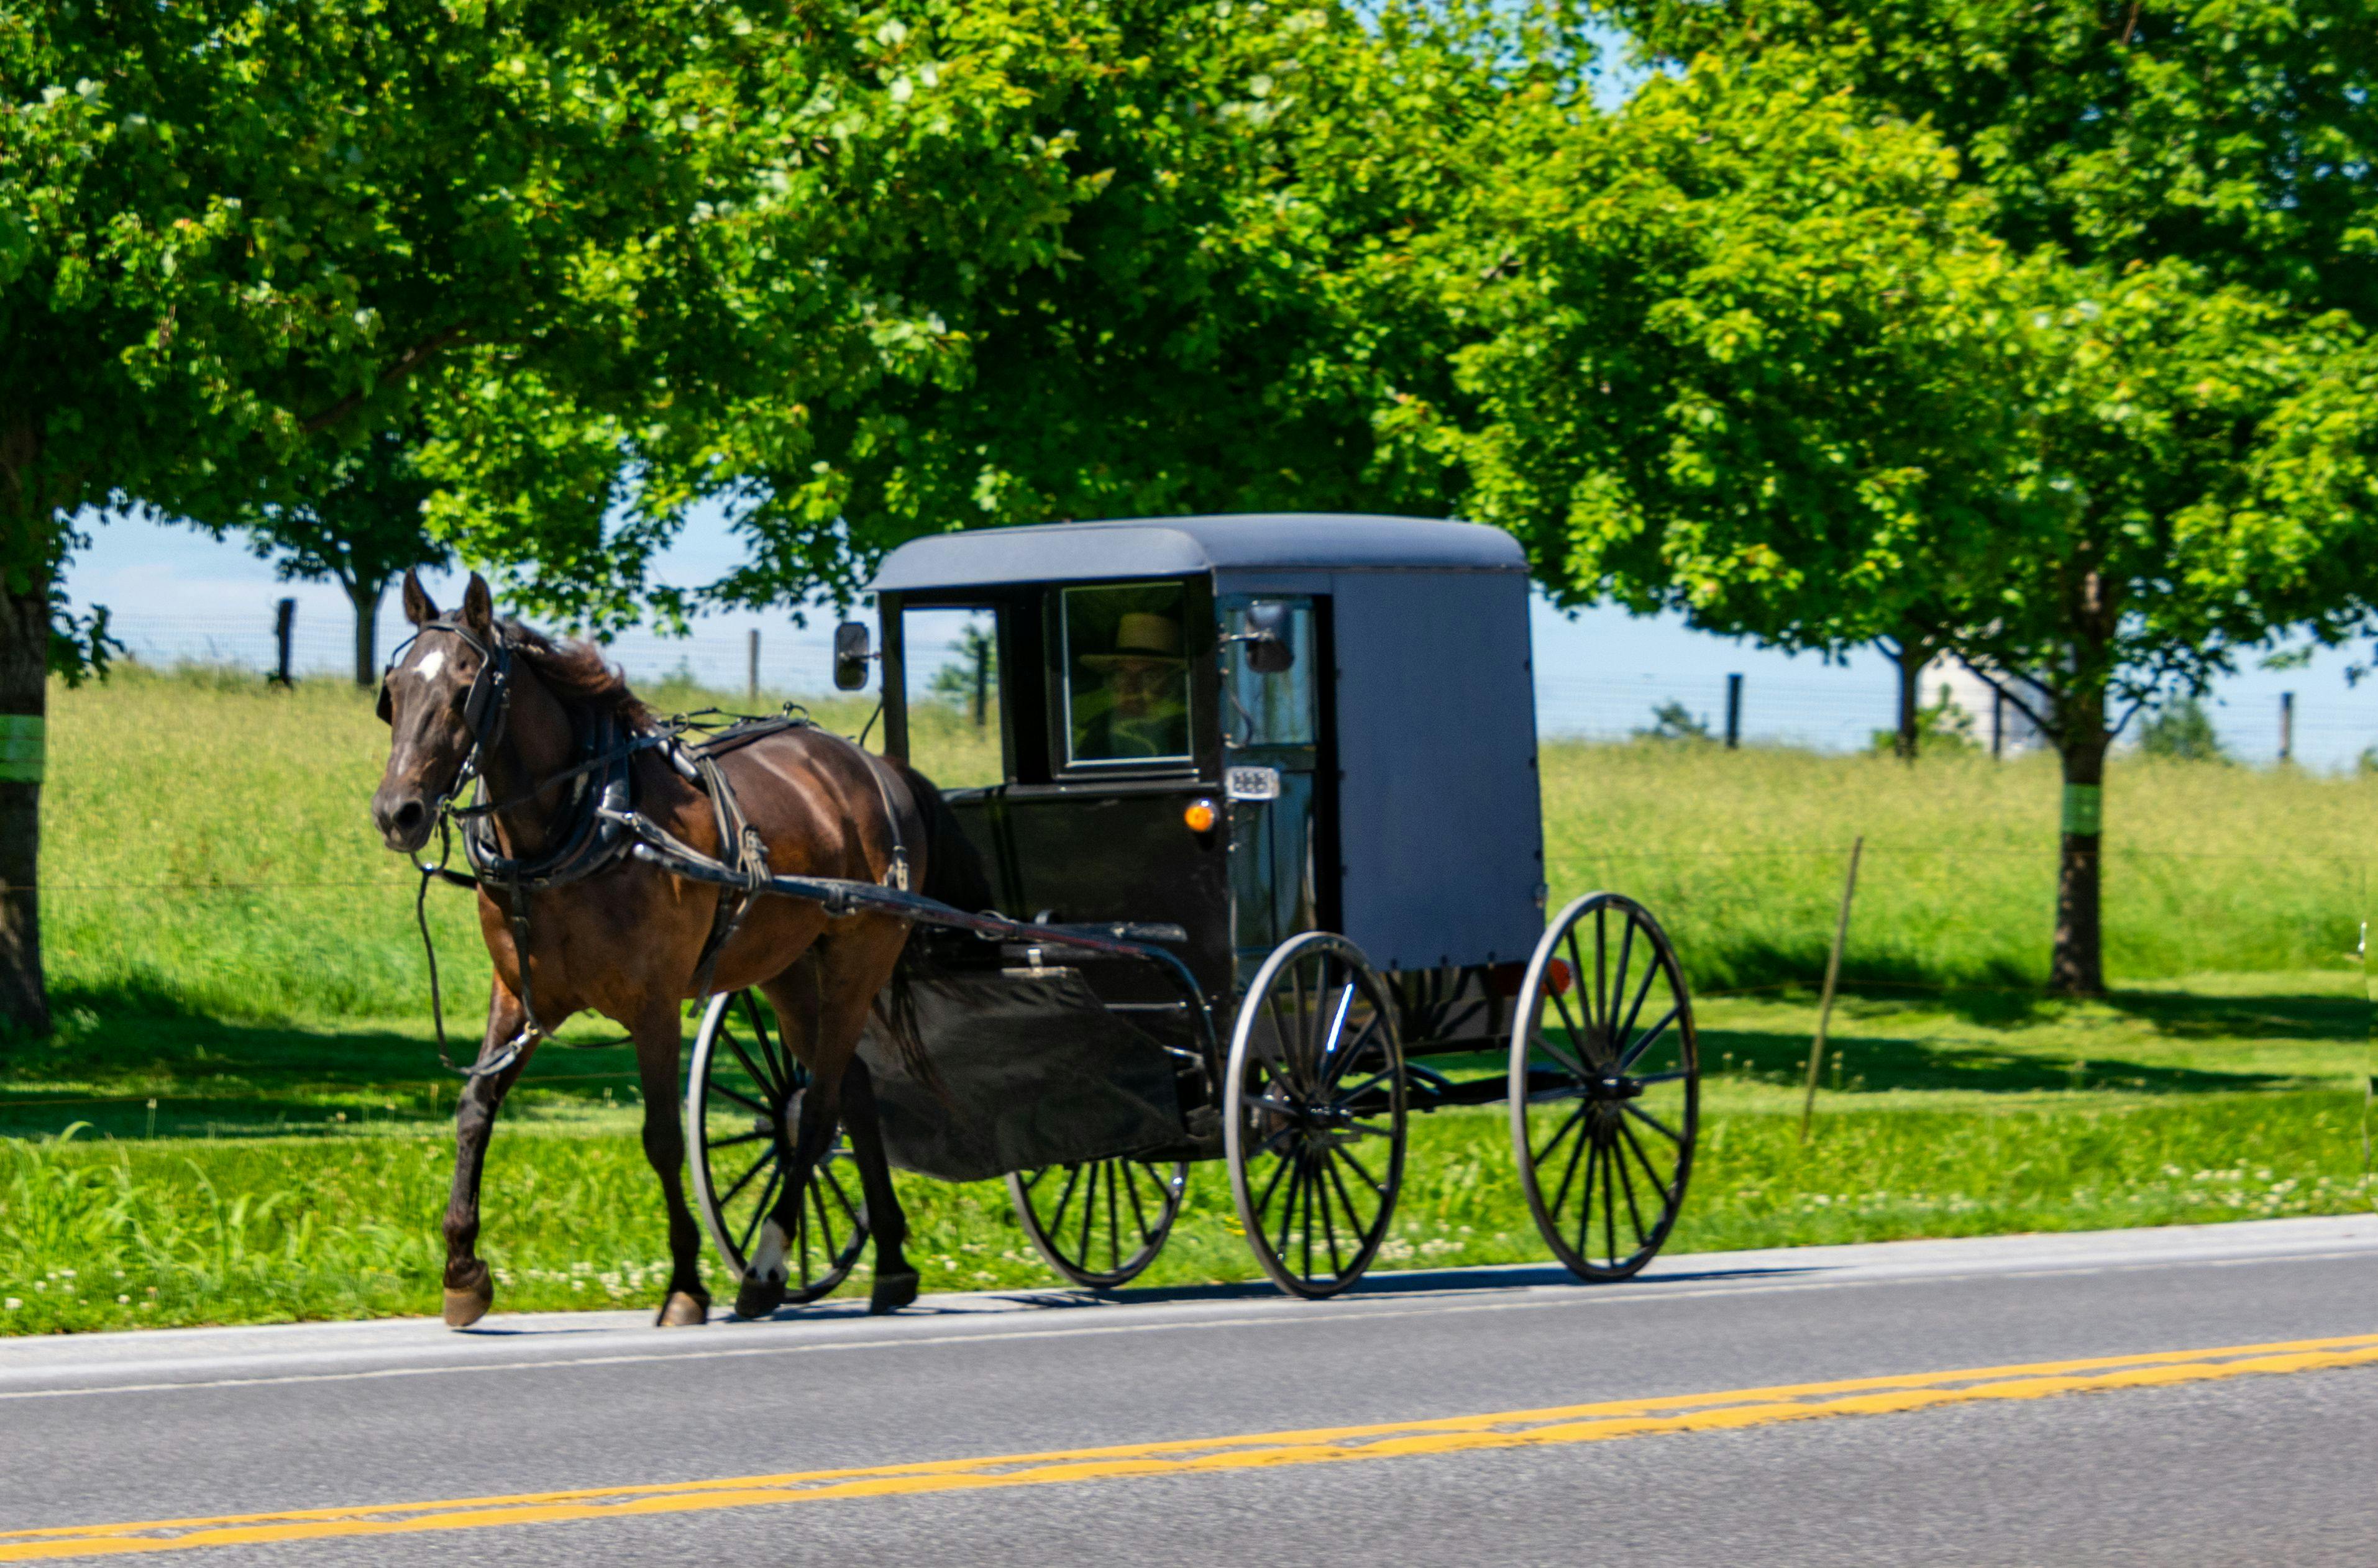 Keep the Cart Behind the Horse: Privilege and Responsibility as a Provider